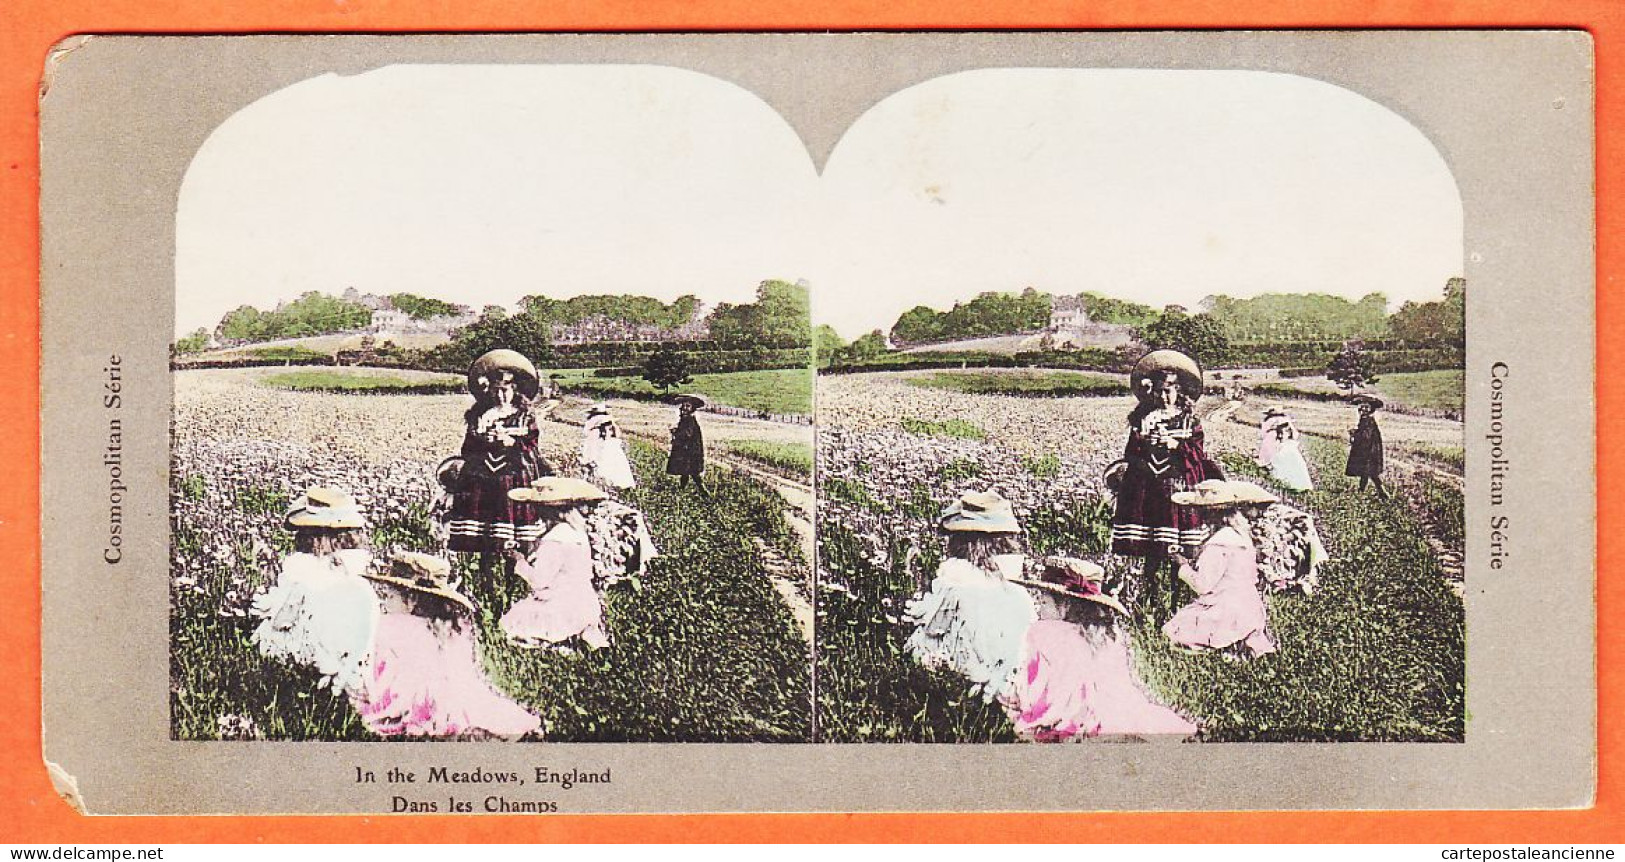 04575 / ENGLAND In The Meadows ANGLETERRE Dans Les Champs 1890s Stereo-Views COSMOPOLITAN Serie - Stereoscopic